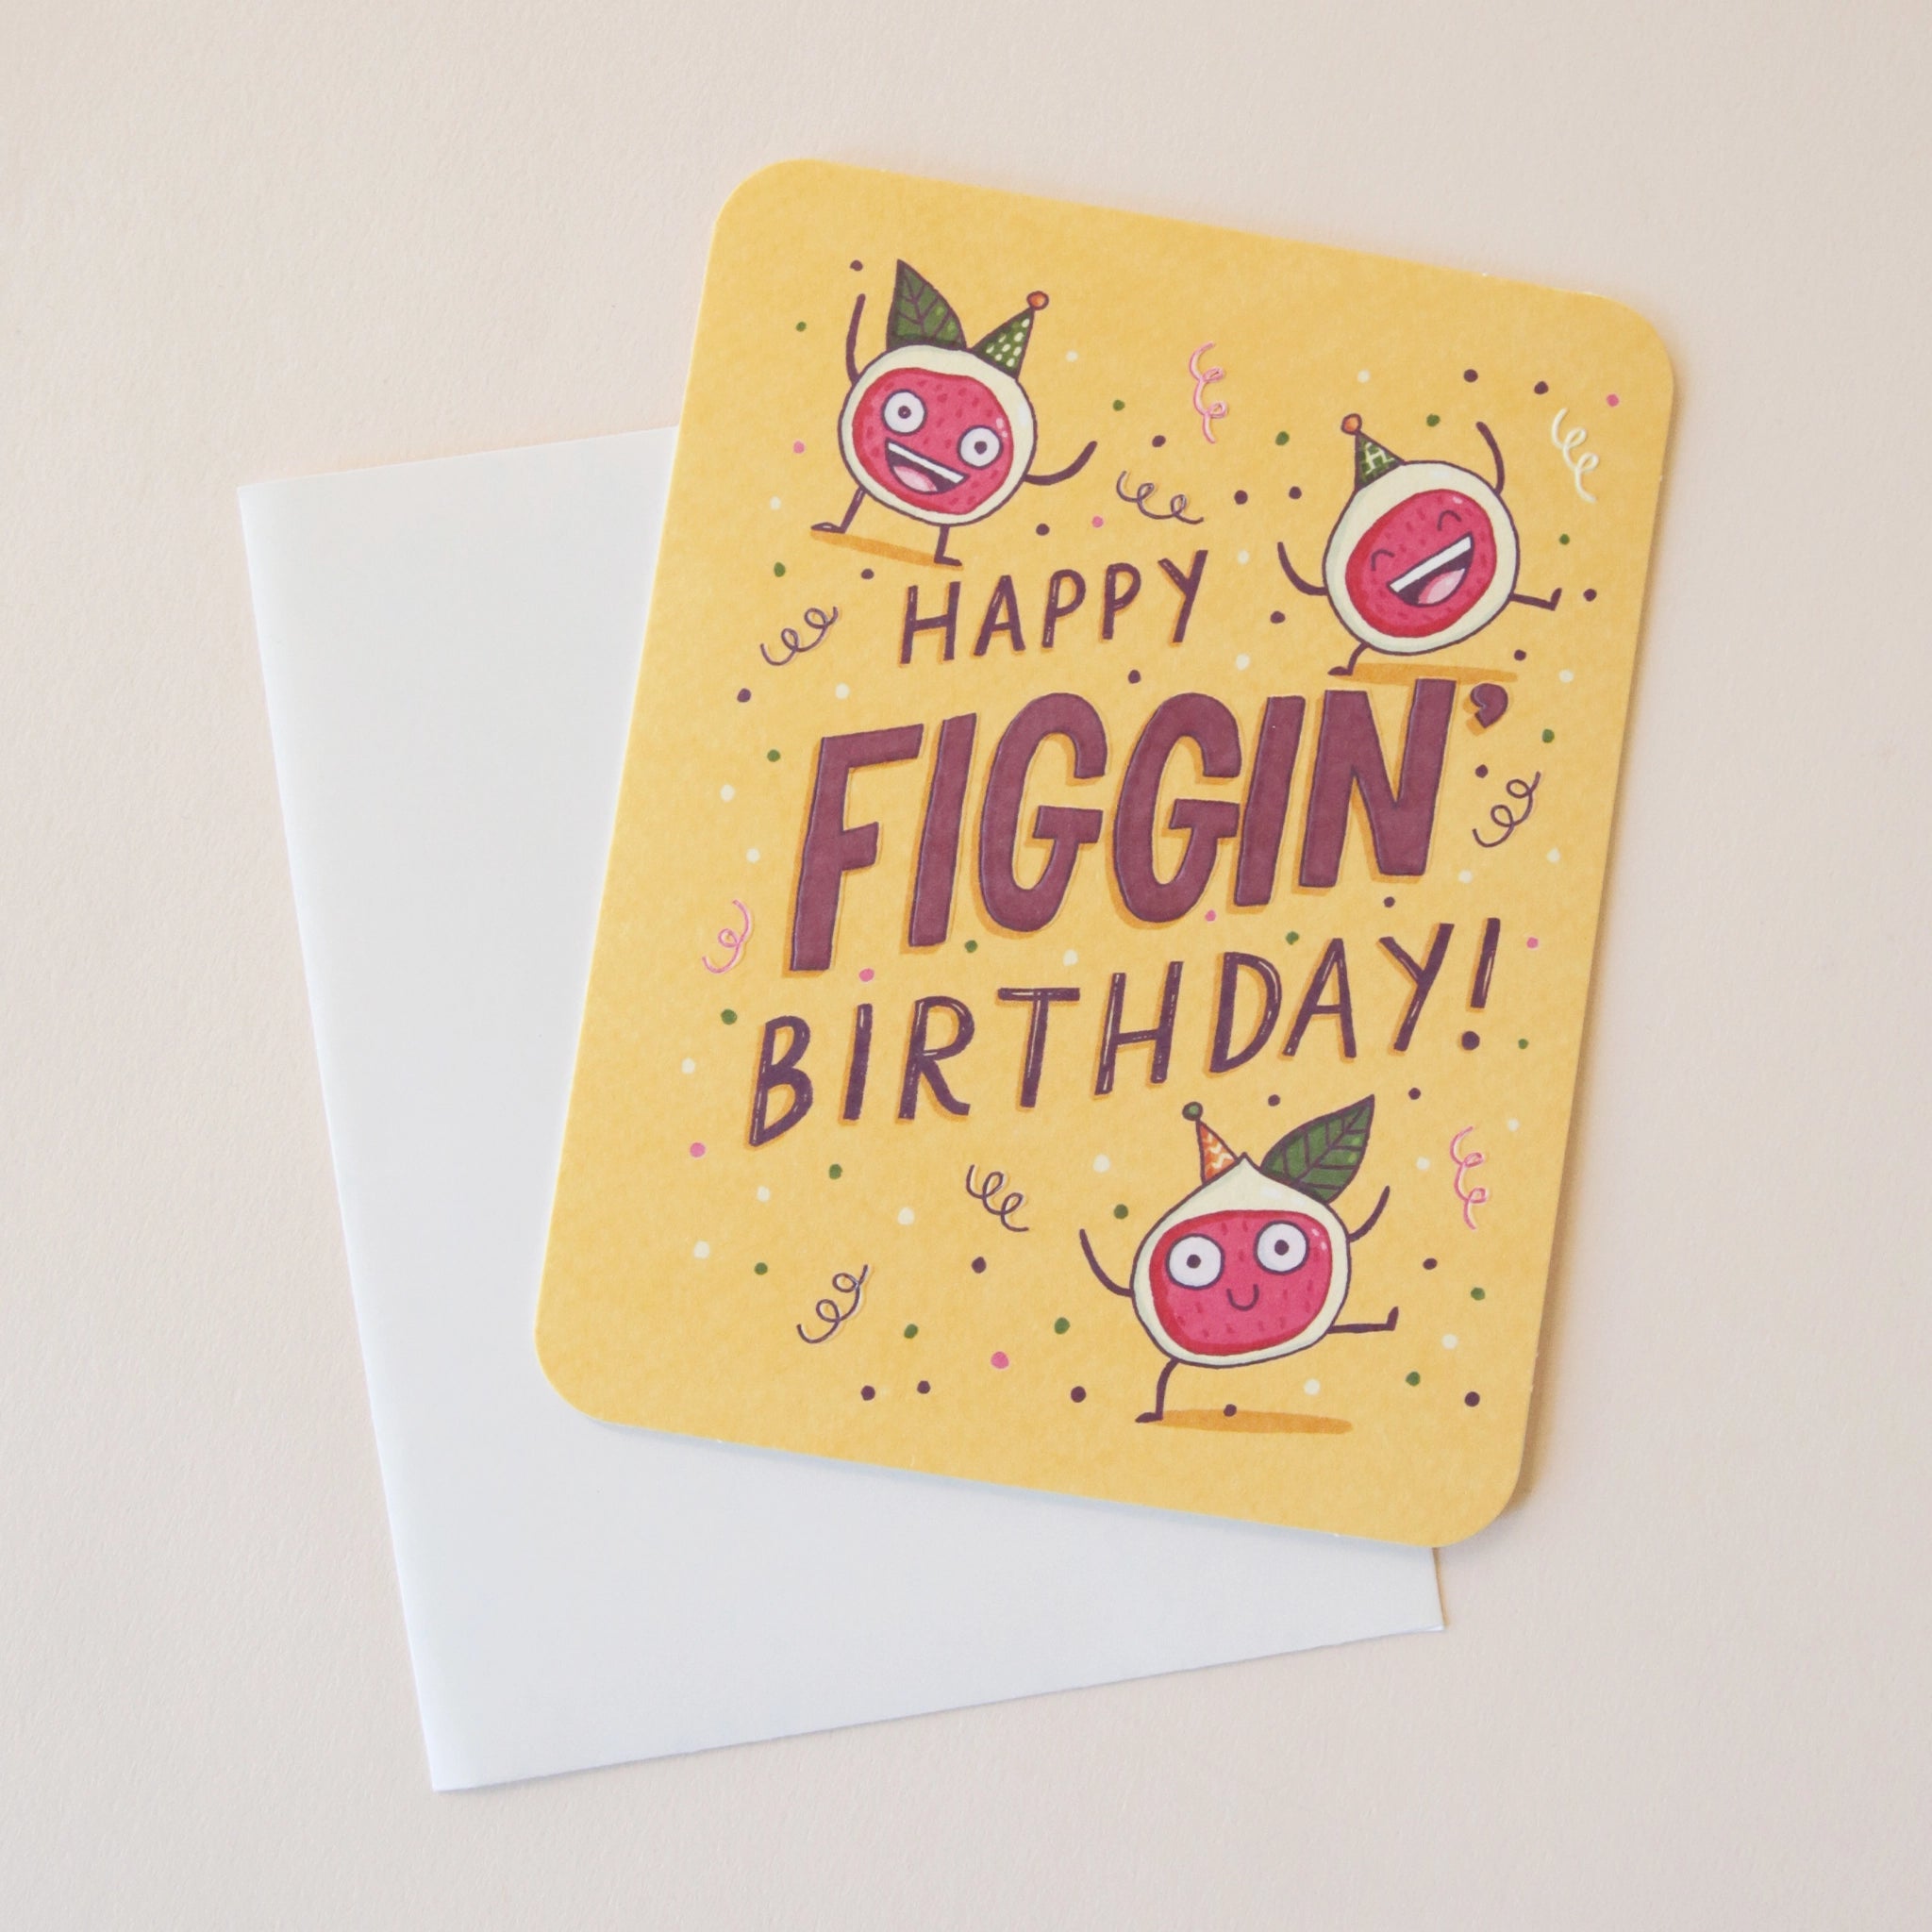 A yellow card with three fig illustrations with their hands up and celebrating along with words in the center that read, "Happy Figgin' Birthday" along with a coordinating sticker that reads, "Get Figgy With It" and a white envelope.